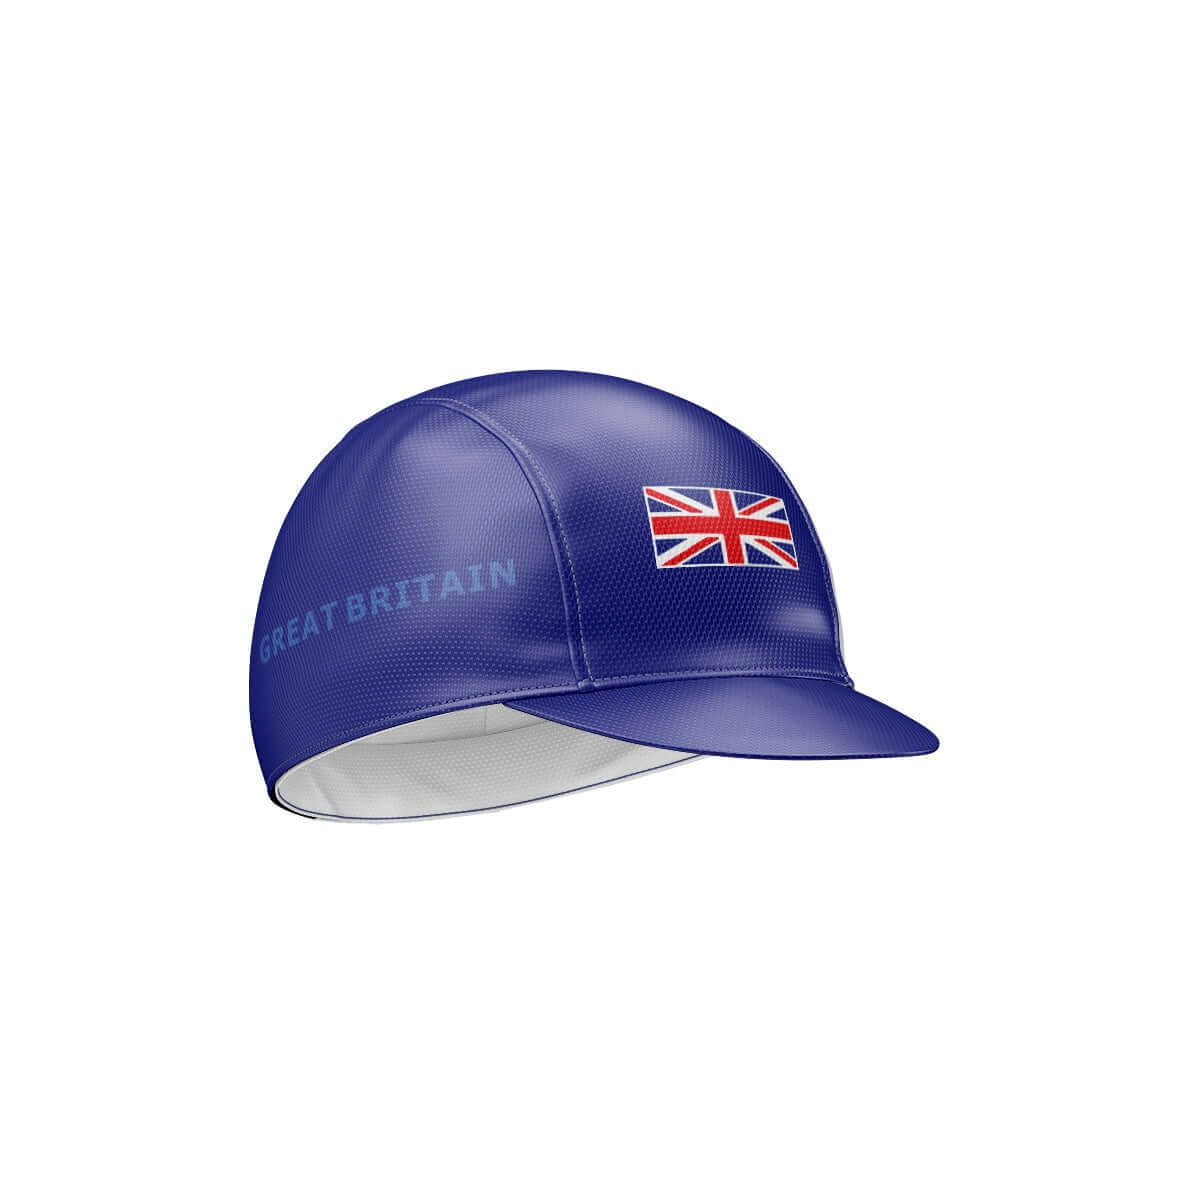 Great Britain Cycling Cap (Unisex)